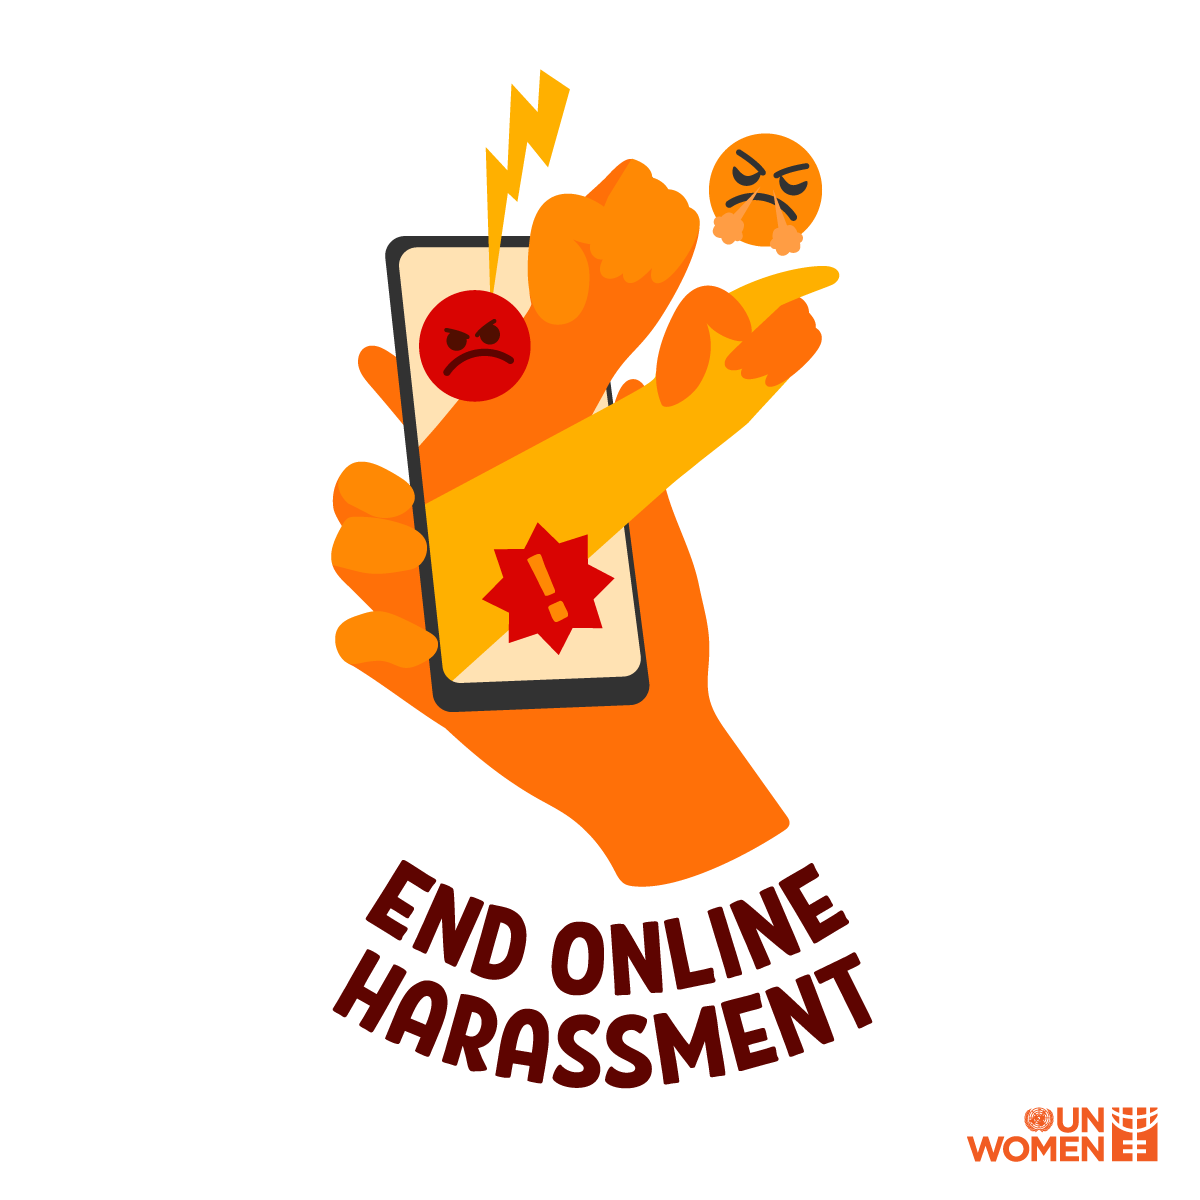 📌Online harassment is harmful and unacceptable!

Let's create a safer and more respectful digital space for everyone. 

#EndOnlineHarassment #DigitalLiteracy